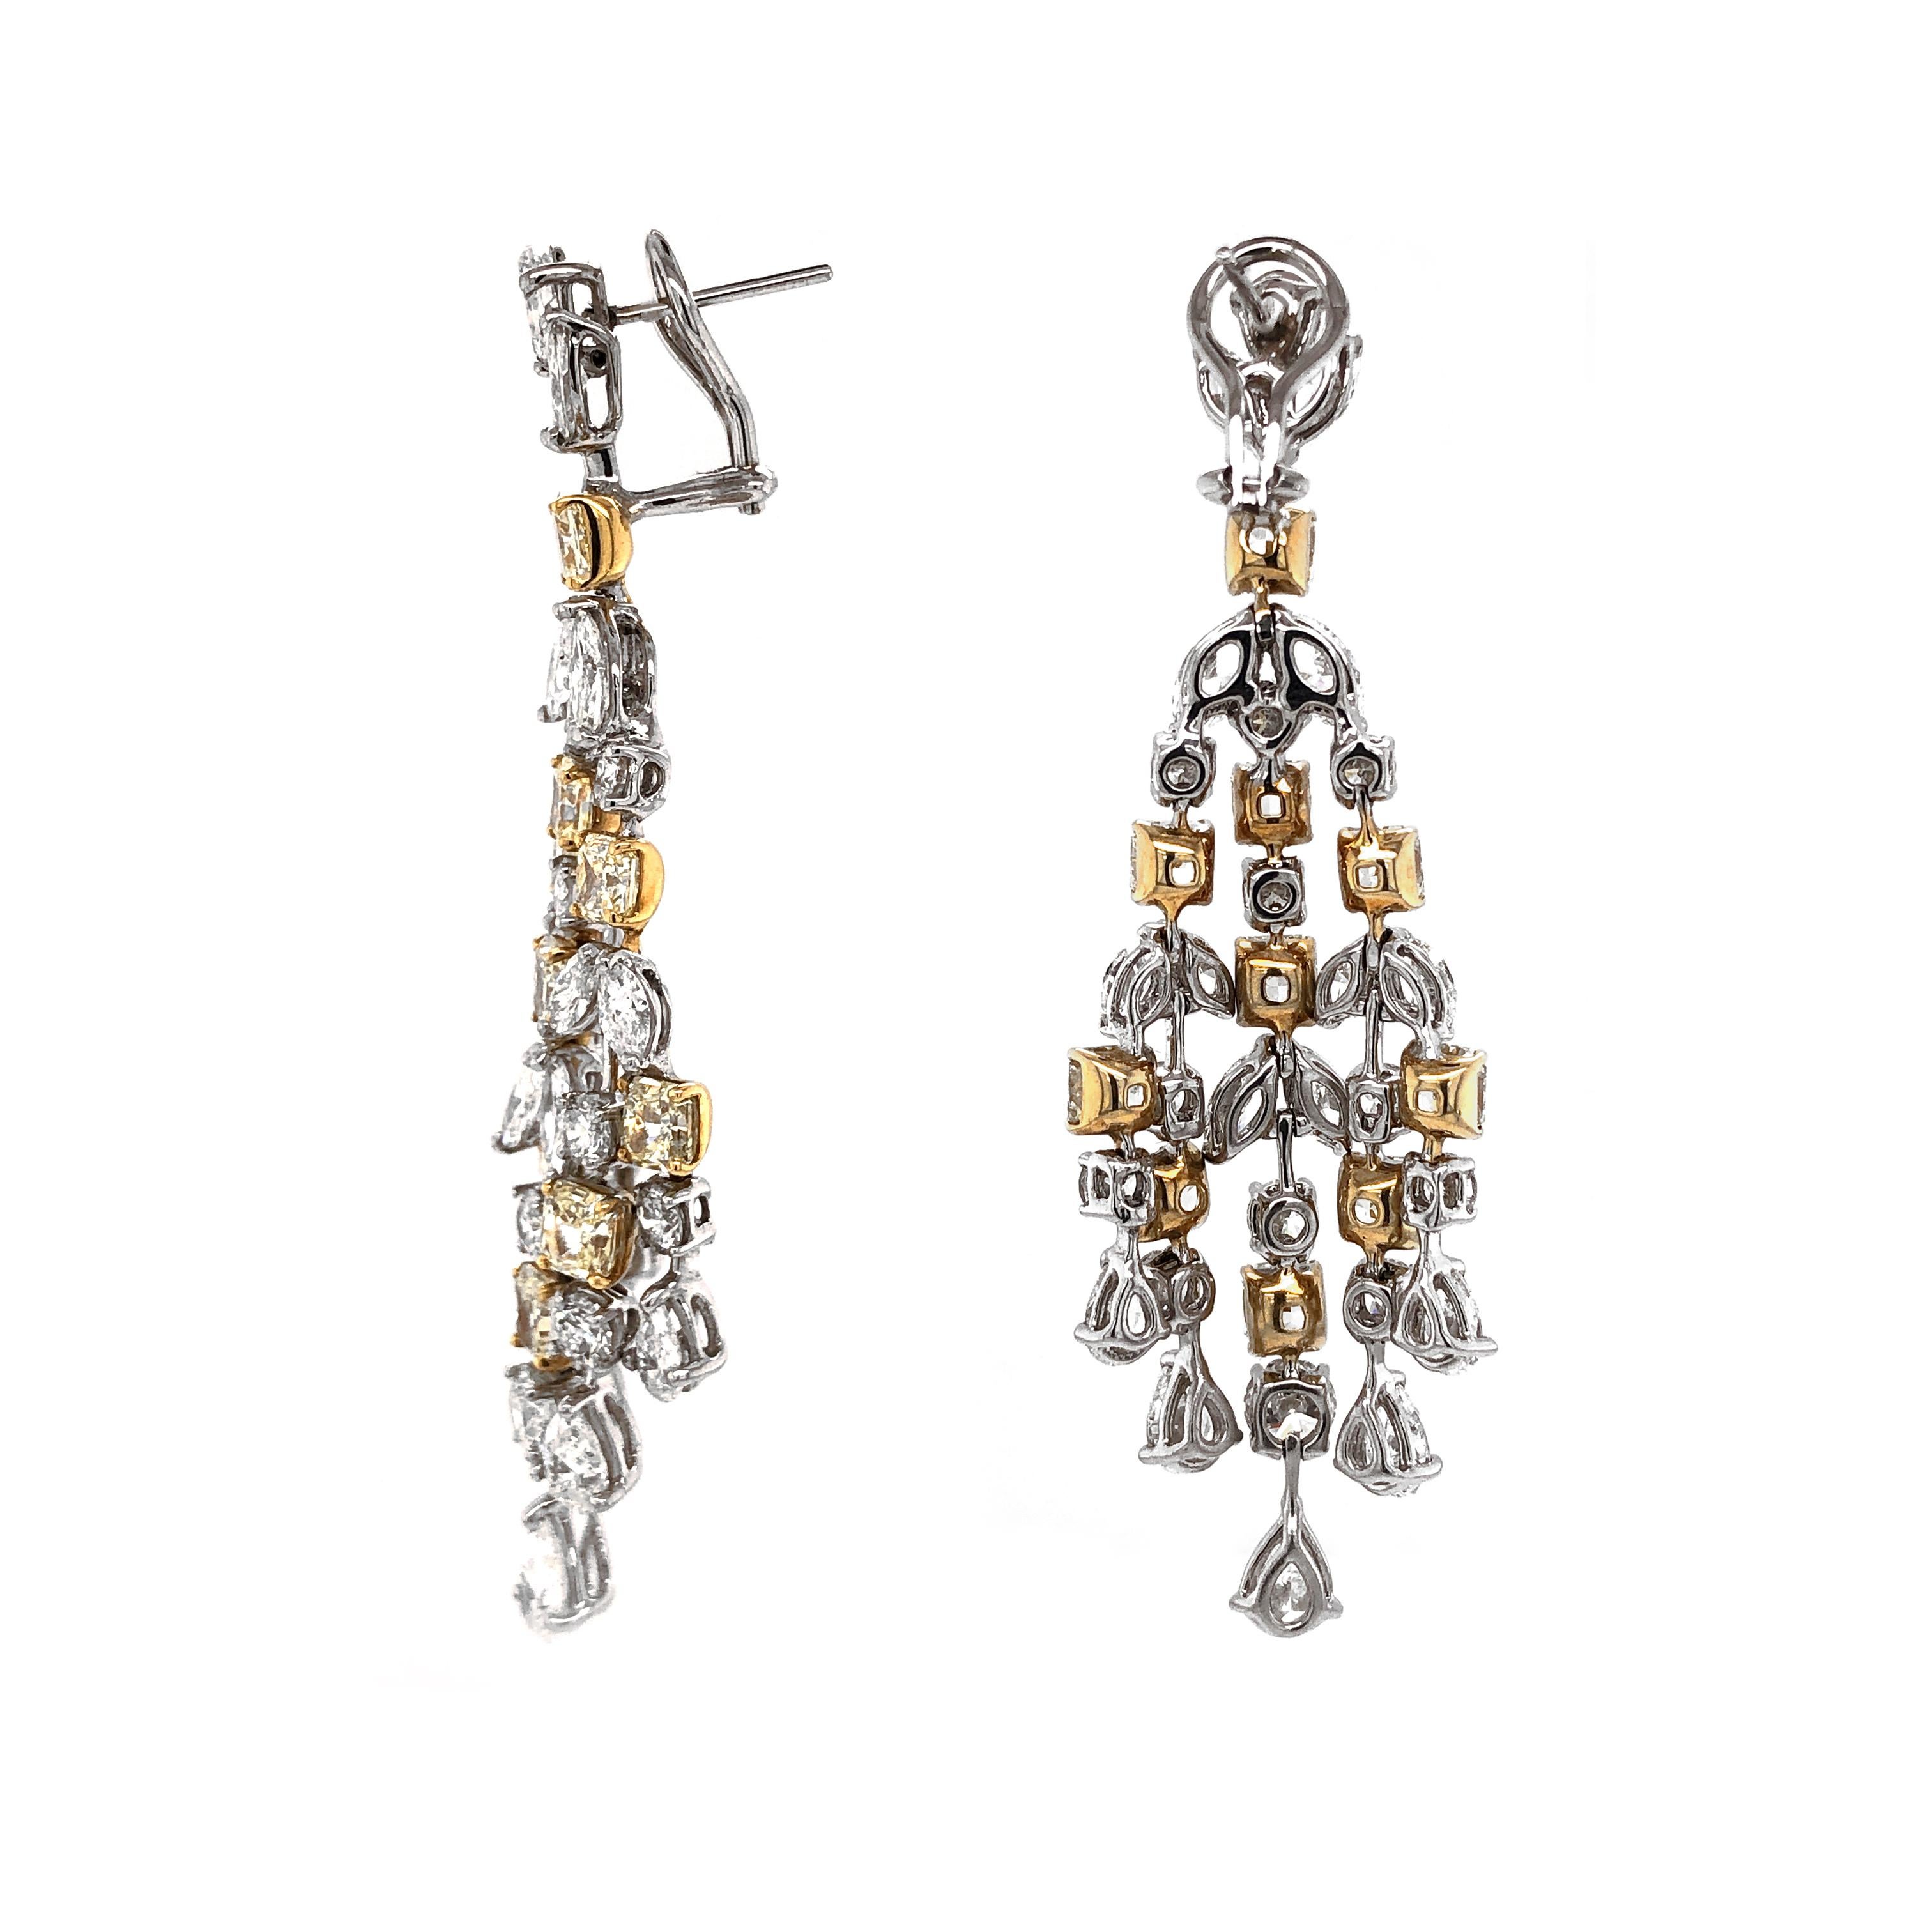 Handcrafted 18 karat white gold chandelier earrings.
Radiant cut yellow diamonds 11.49 ct.
Accented with pear, round, and marquise white diamonds 15.87 ct.
Diamonds are all natural in G-H Color Clarity VS. 
French / Omega clips.
Width: 2.5